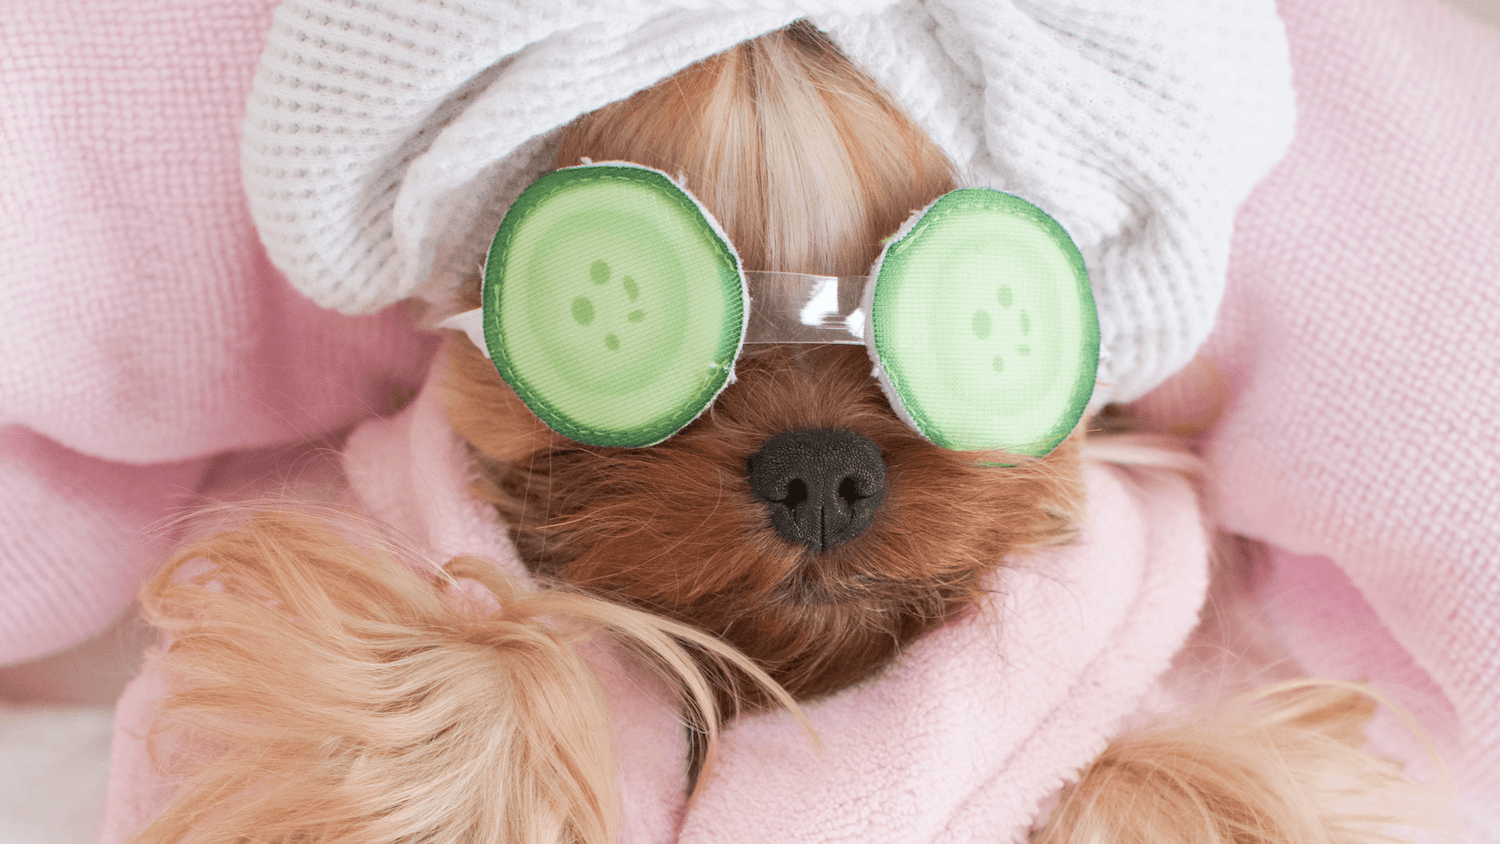 yorkshire terrier puppy at the spa with cucumbers over it's eyes. 